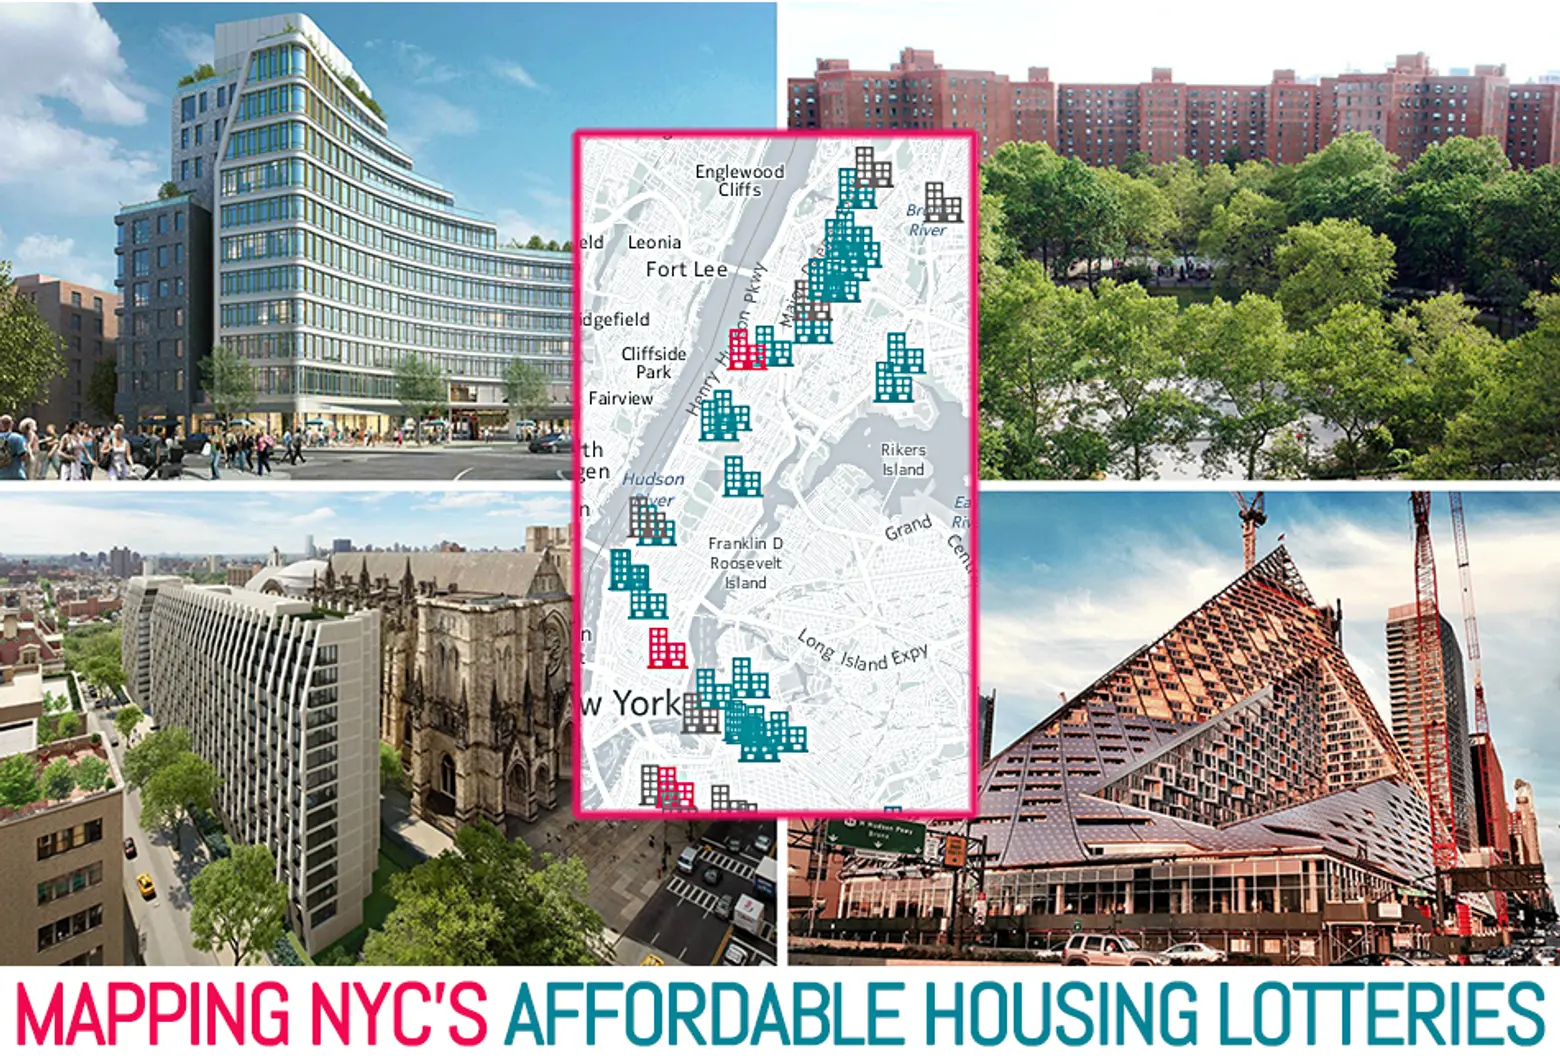 MAP: Where to Find NYC’s Current Affordable Housing Lotteries